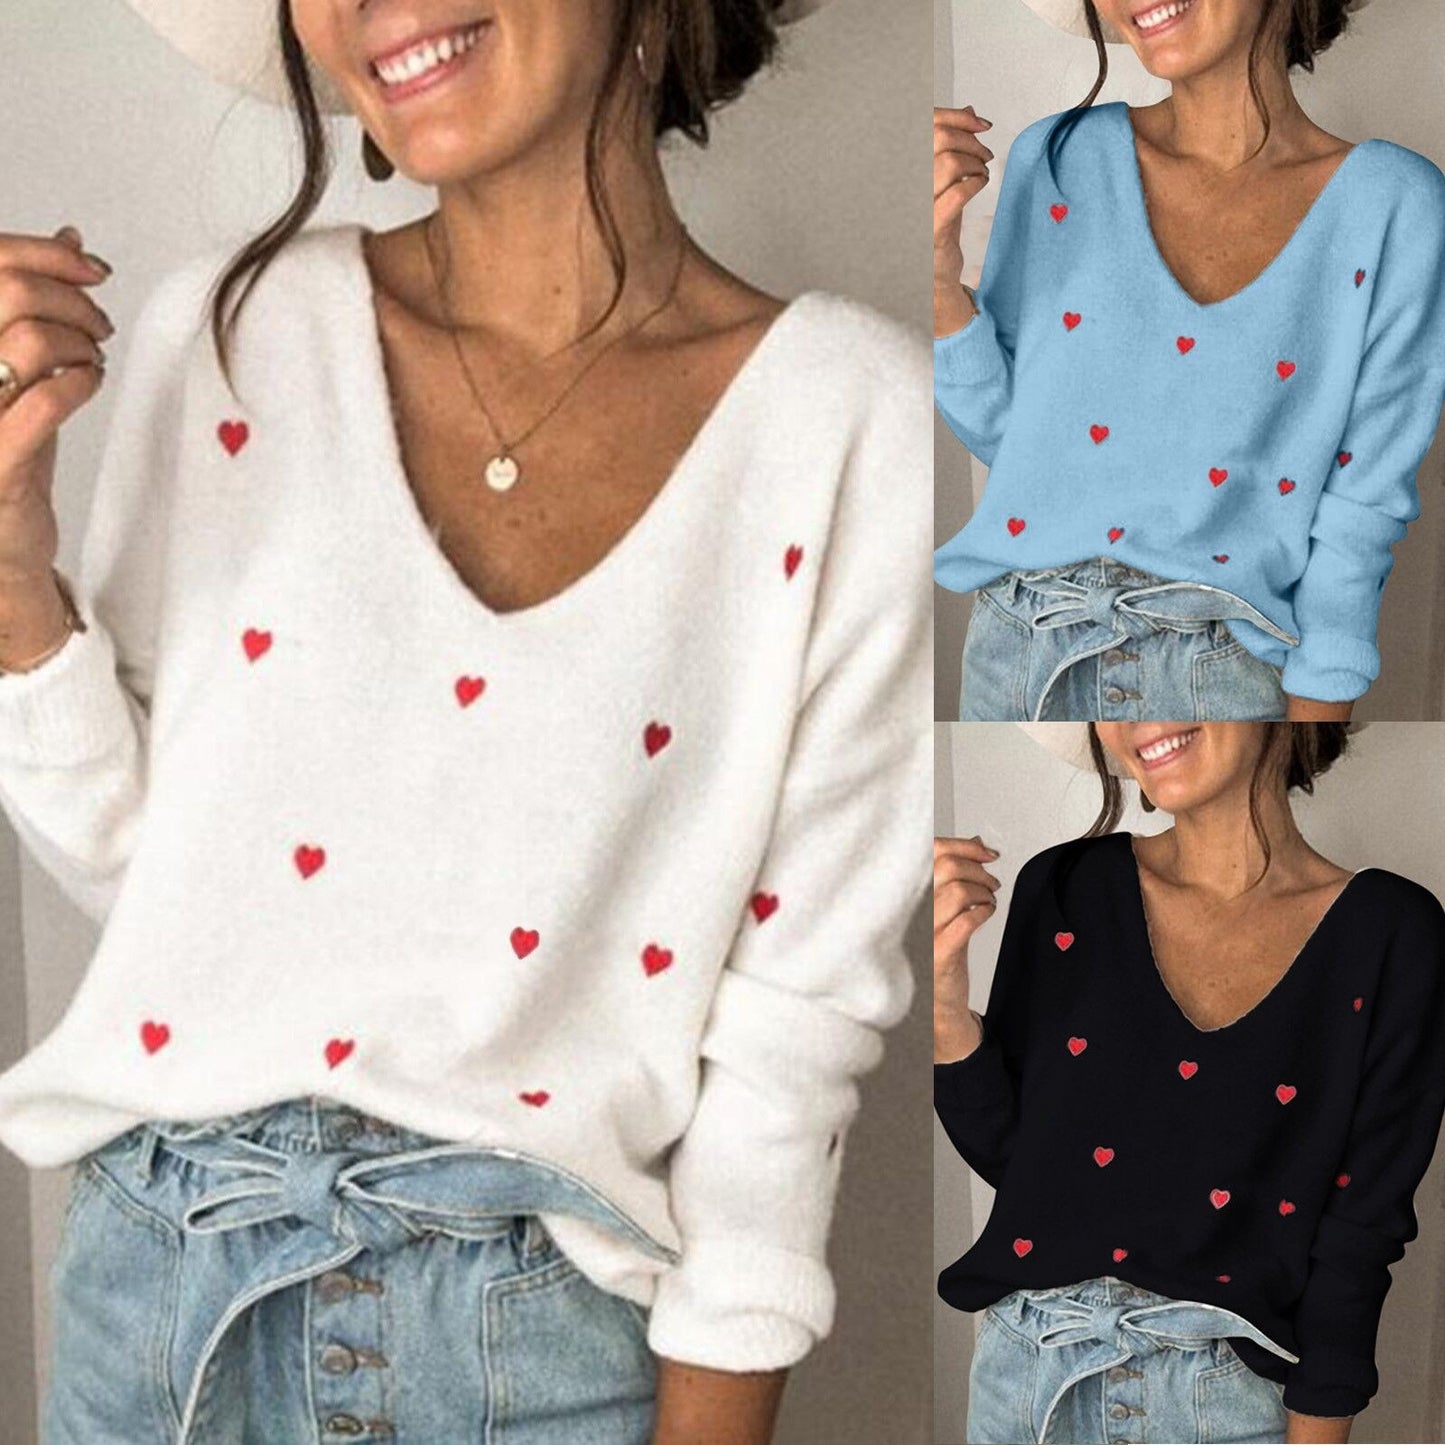 Heart Printed Long Sleeve V-Neck Sweater Tops with Pullovers